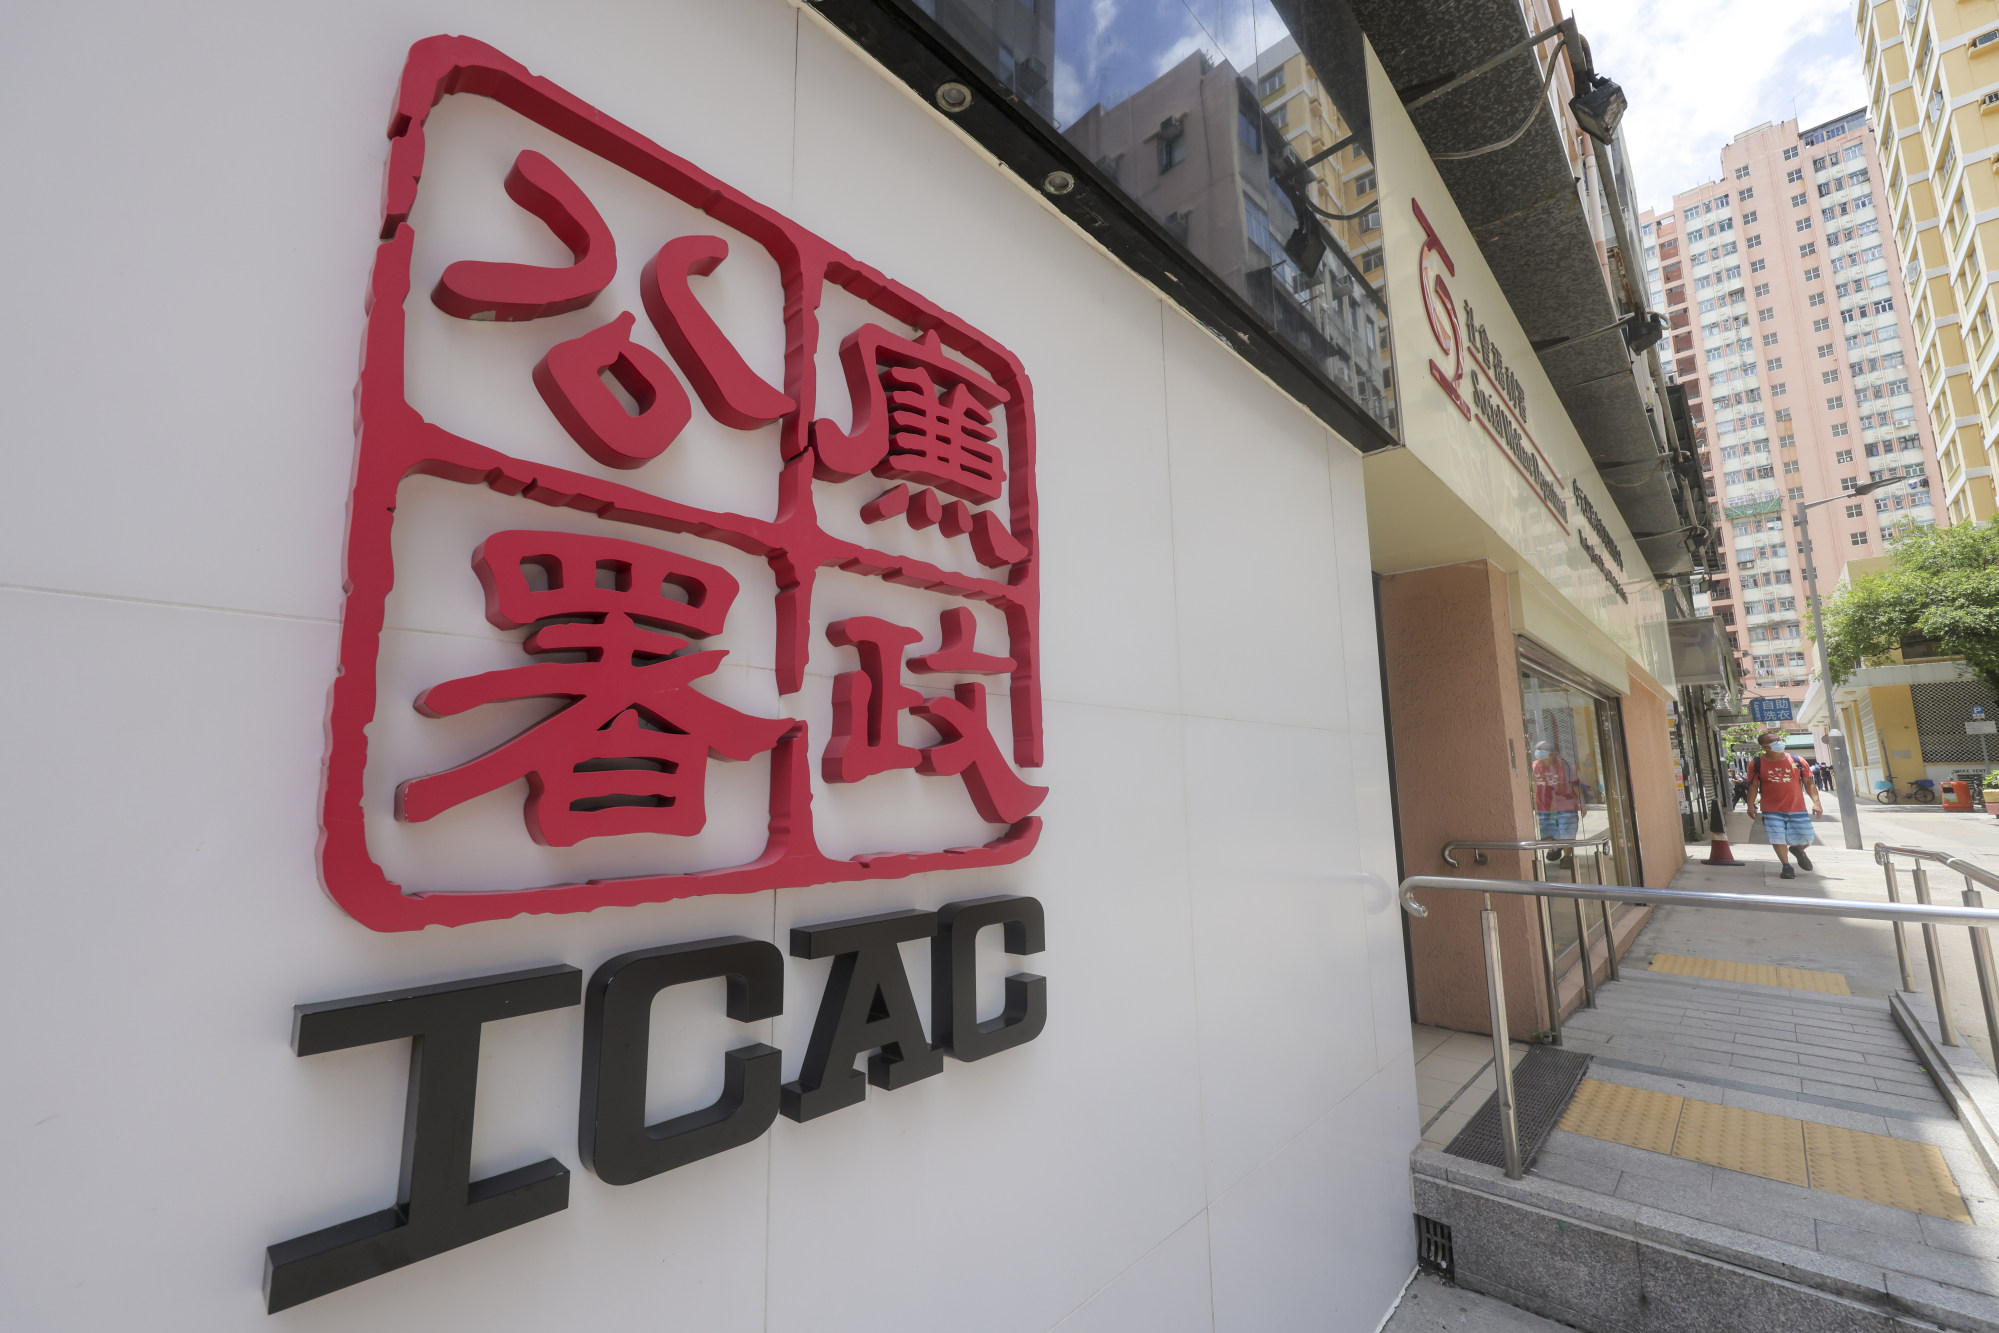 ICAC chief Woo has said the agency must ramp up its youth outreach efforts to align with President Xi’s expectations. Photo: Jelly Tse